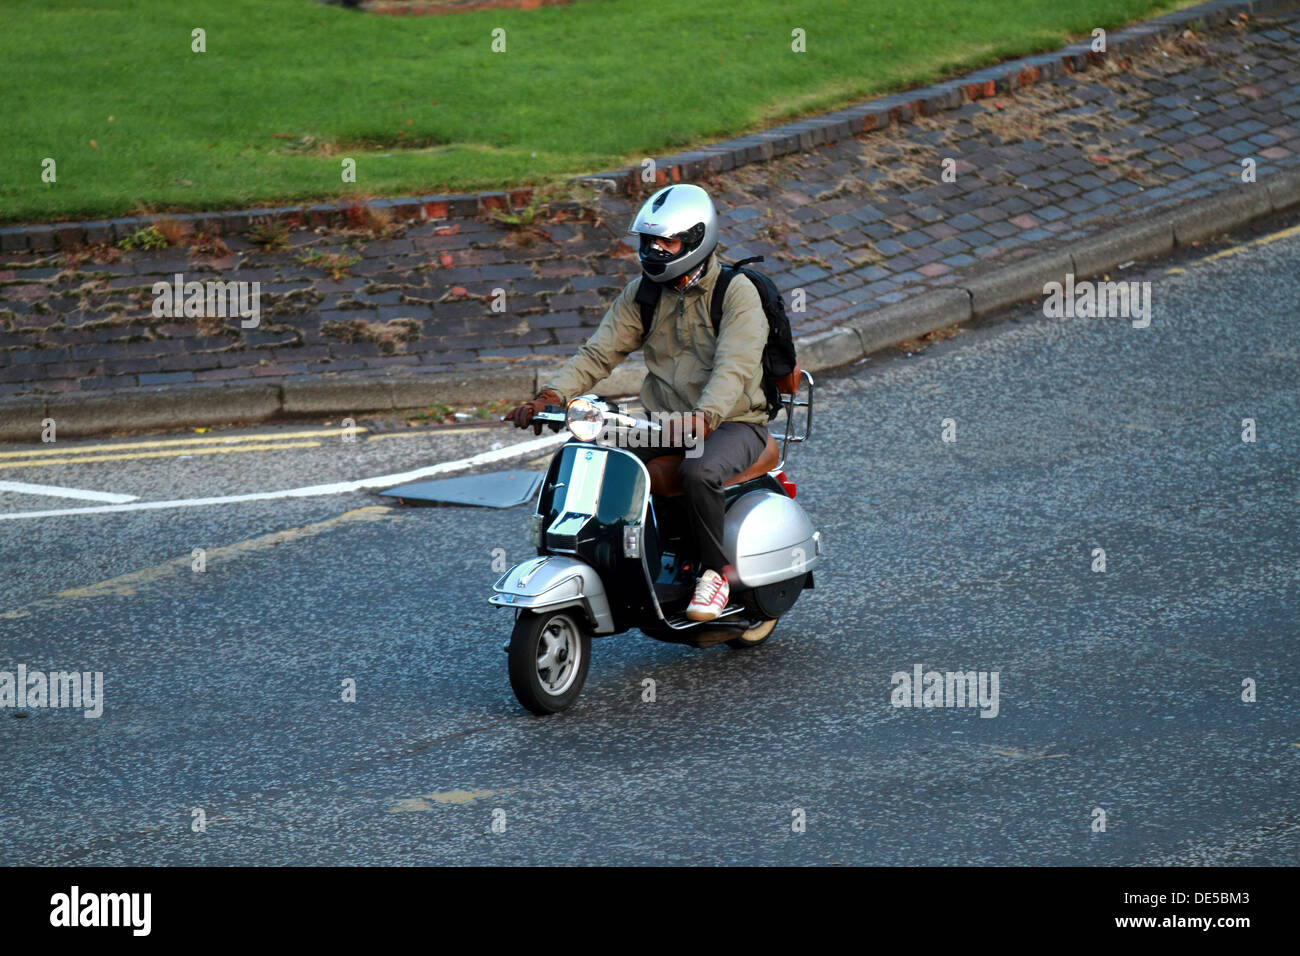 A man on a moped scooter bike travels to work wearing a helmet and plain clothing Stock Photo